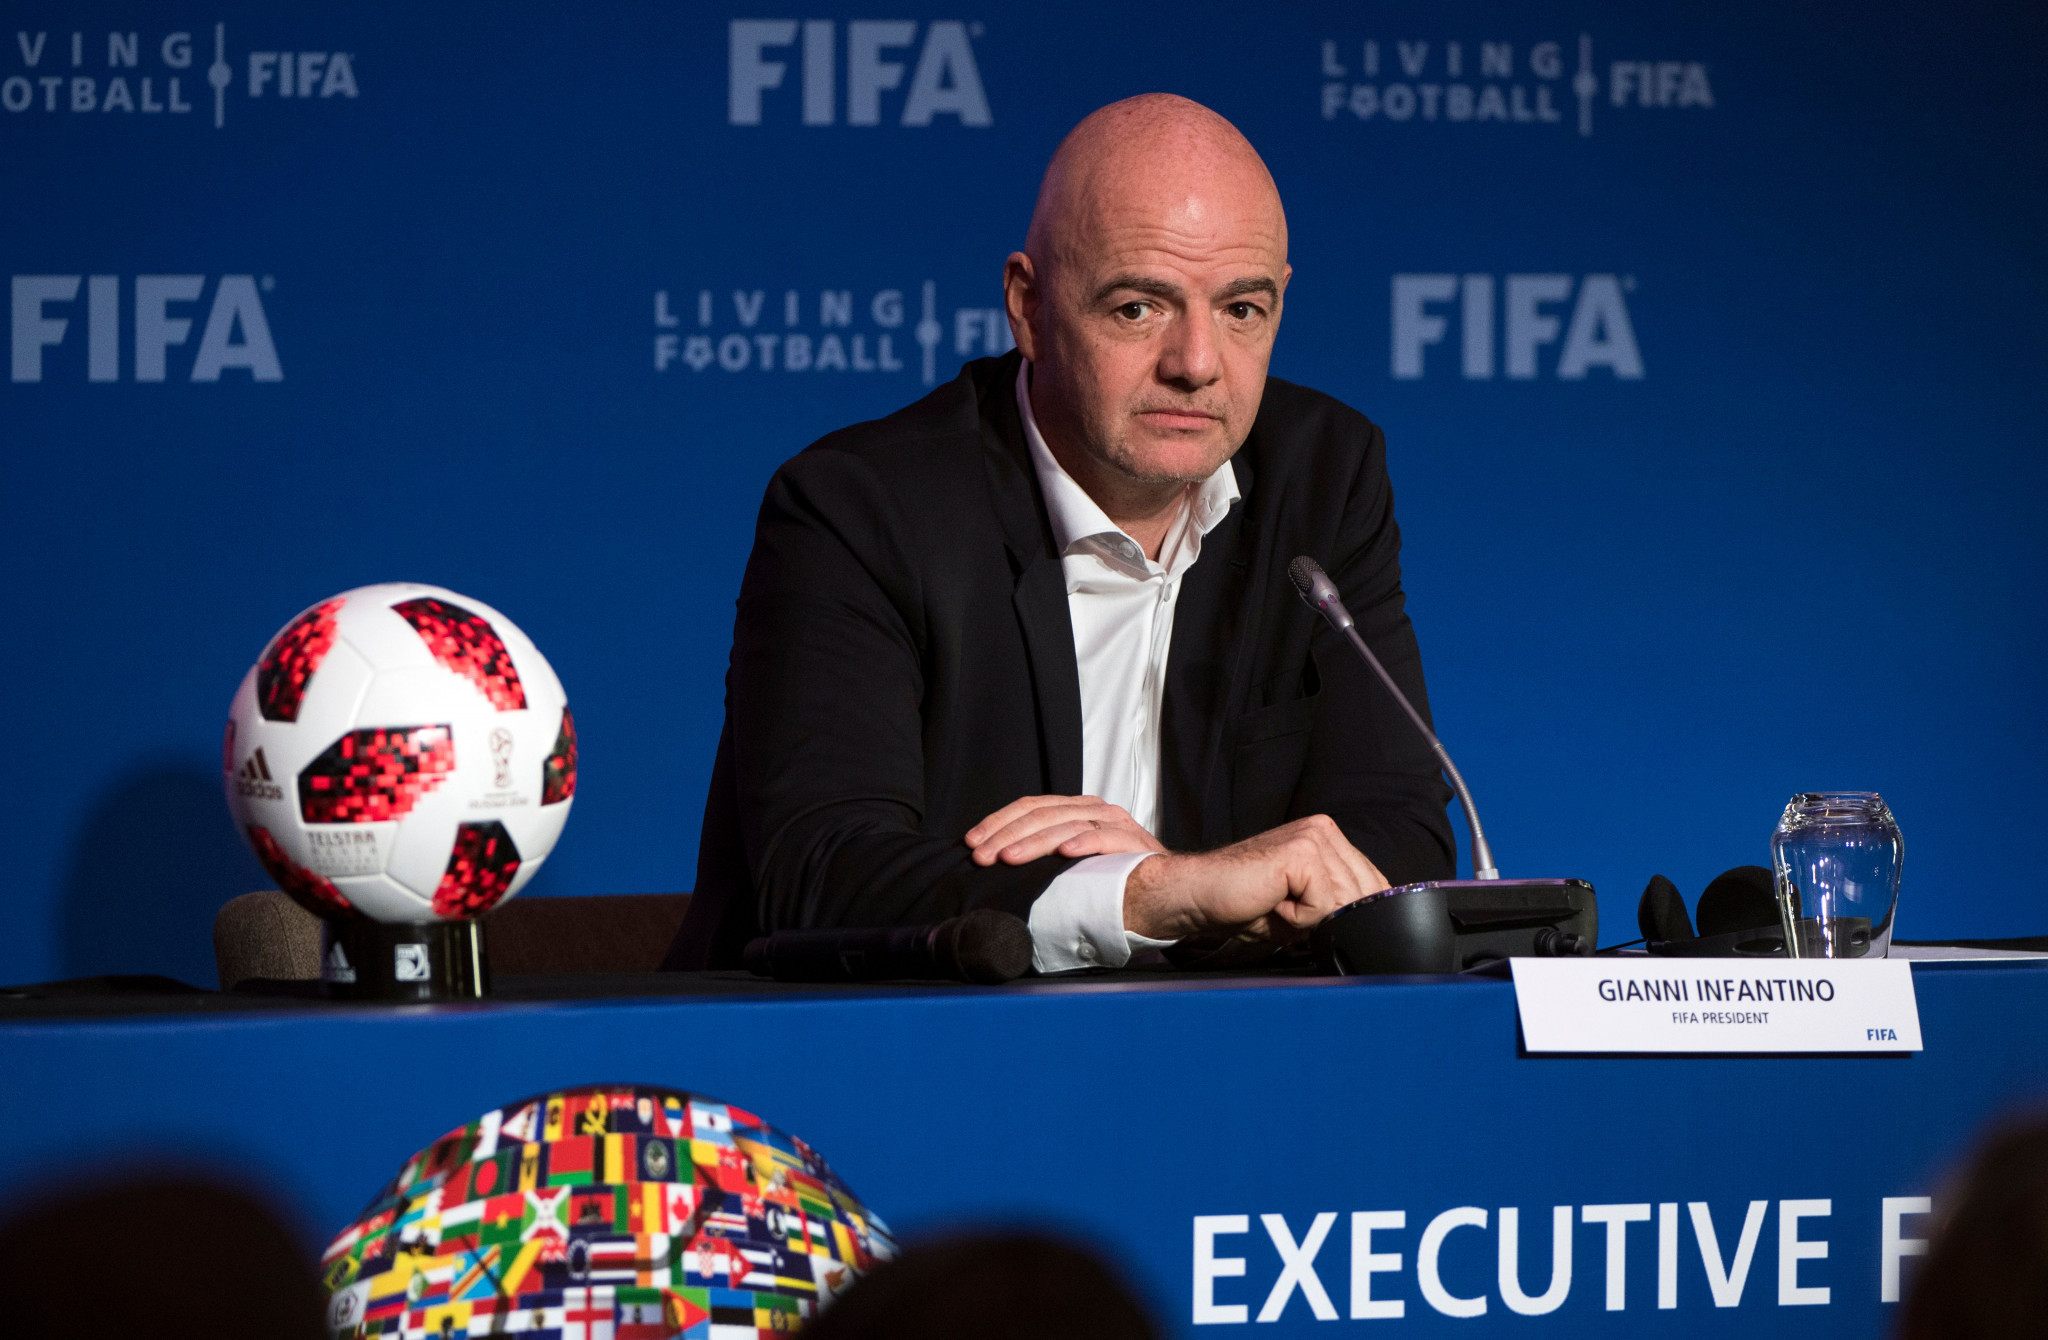 Gianni Infantino could face a challenger in his bid for re-election as FIFA President ©Getty Images